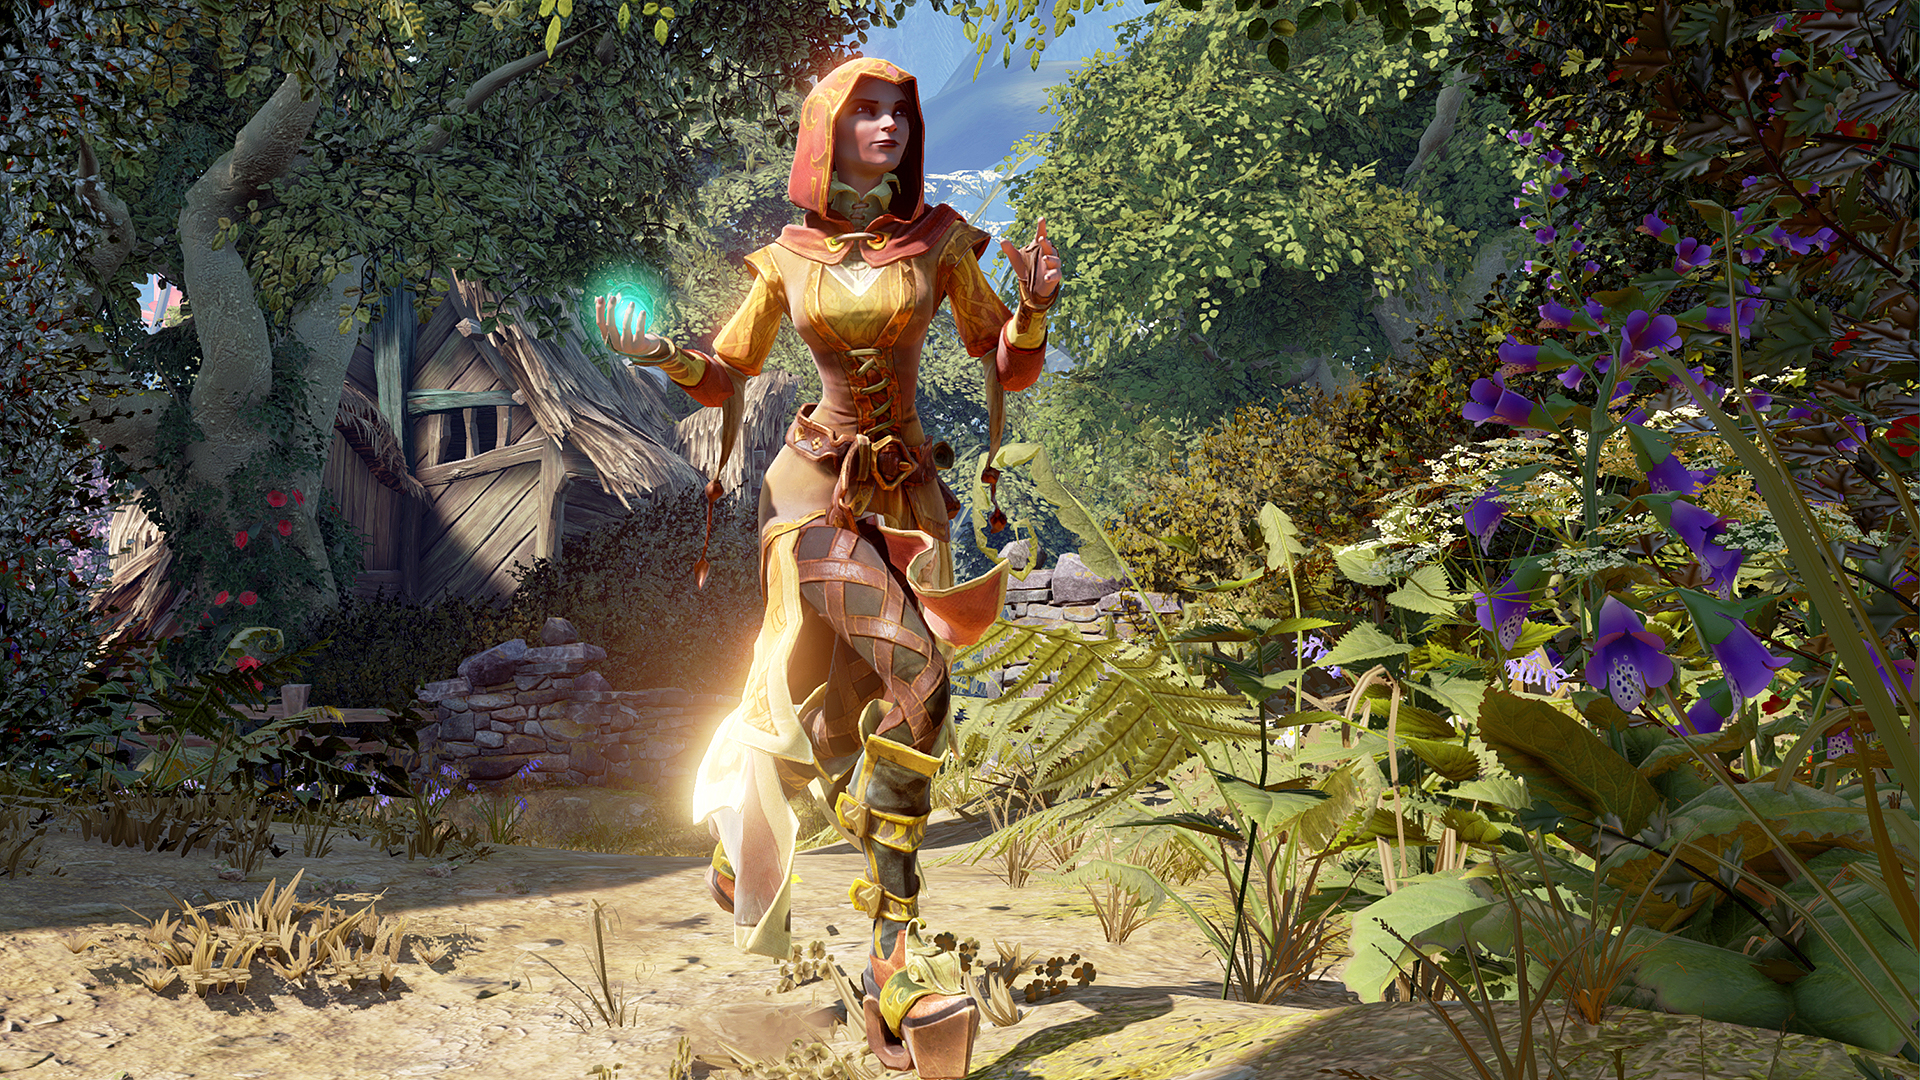 Reports Say Lionhead Closed Because Microsoft Wouldn’t Sell “Fable”